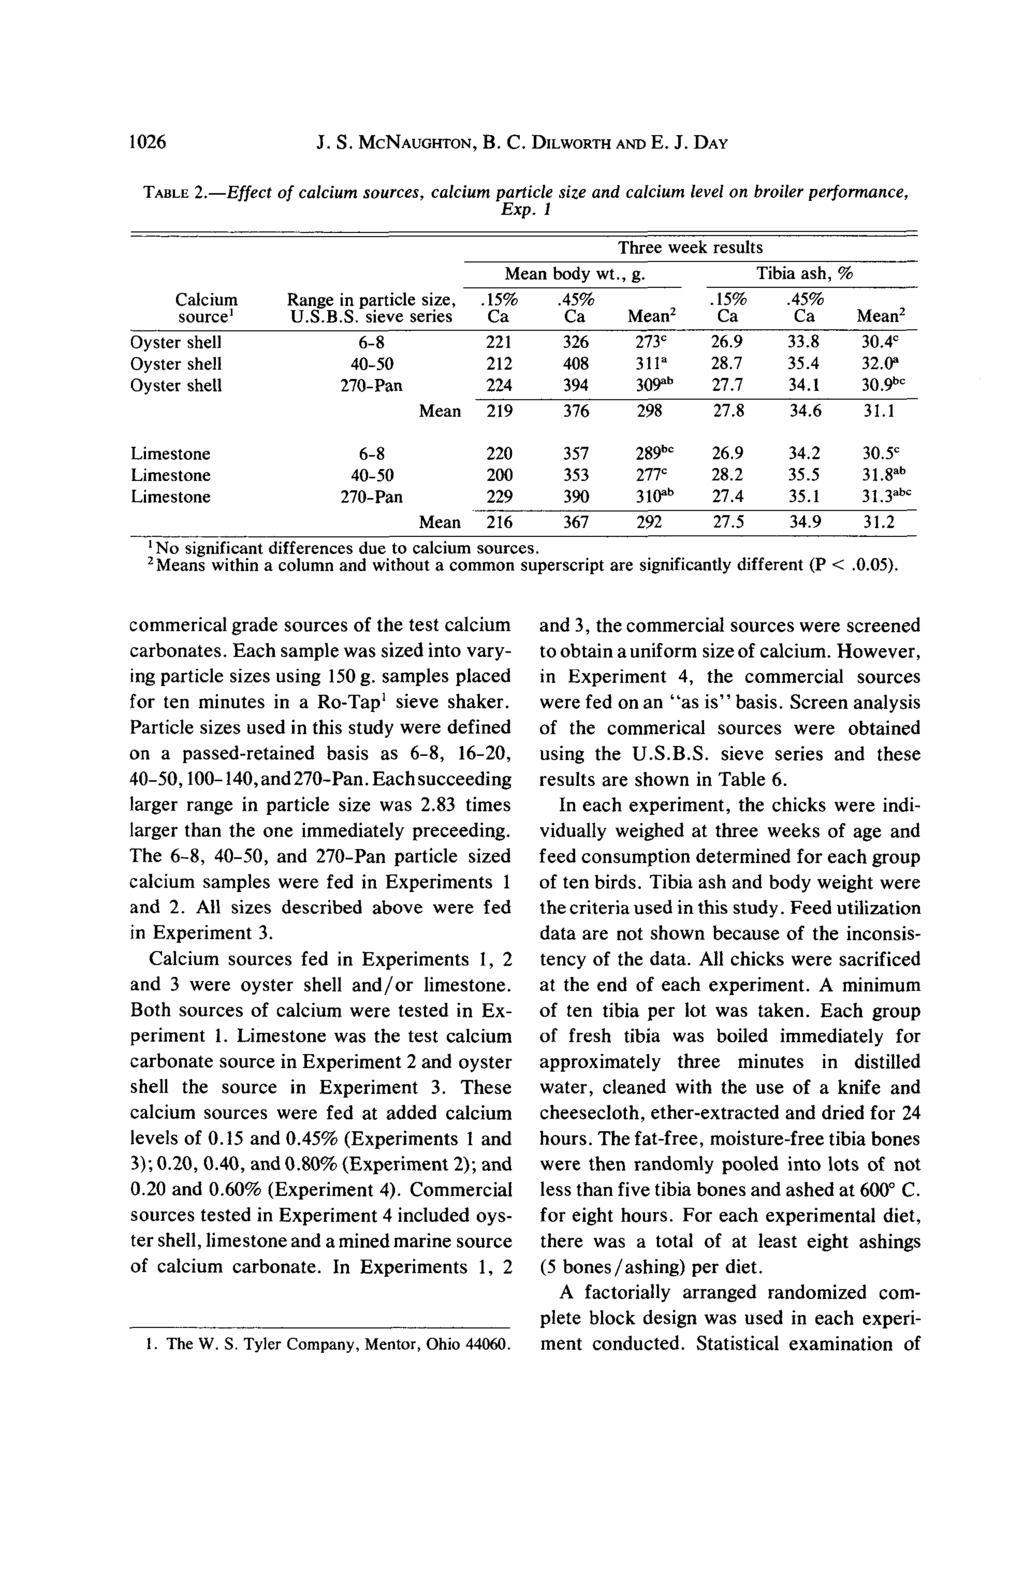 1026 J. S. MCNAUGHTON, B. C. DILWORTH AND E. J. DAY TABLE 2.- -Effect of calcium sources, calcium particle size and calcium level on broiler performance, Exp.